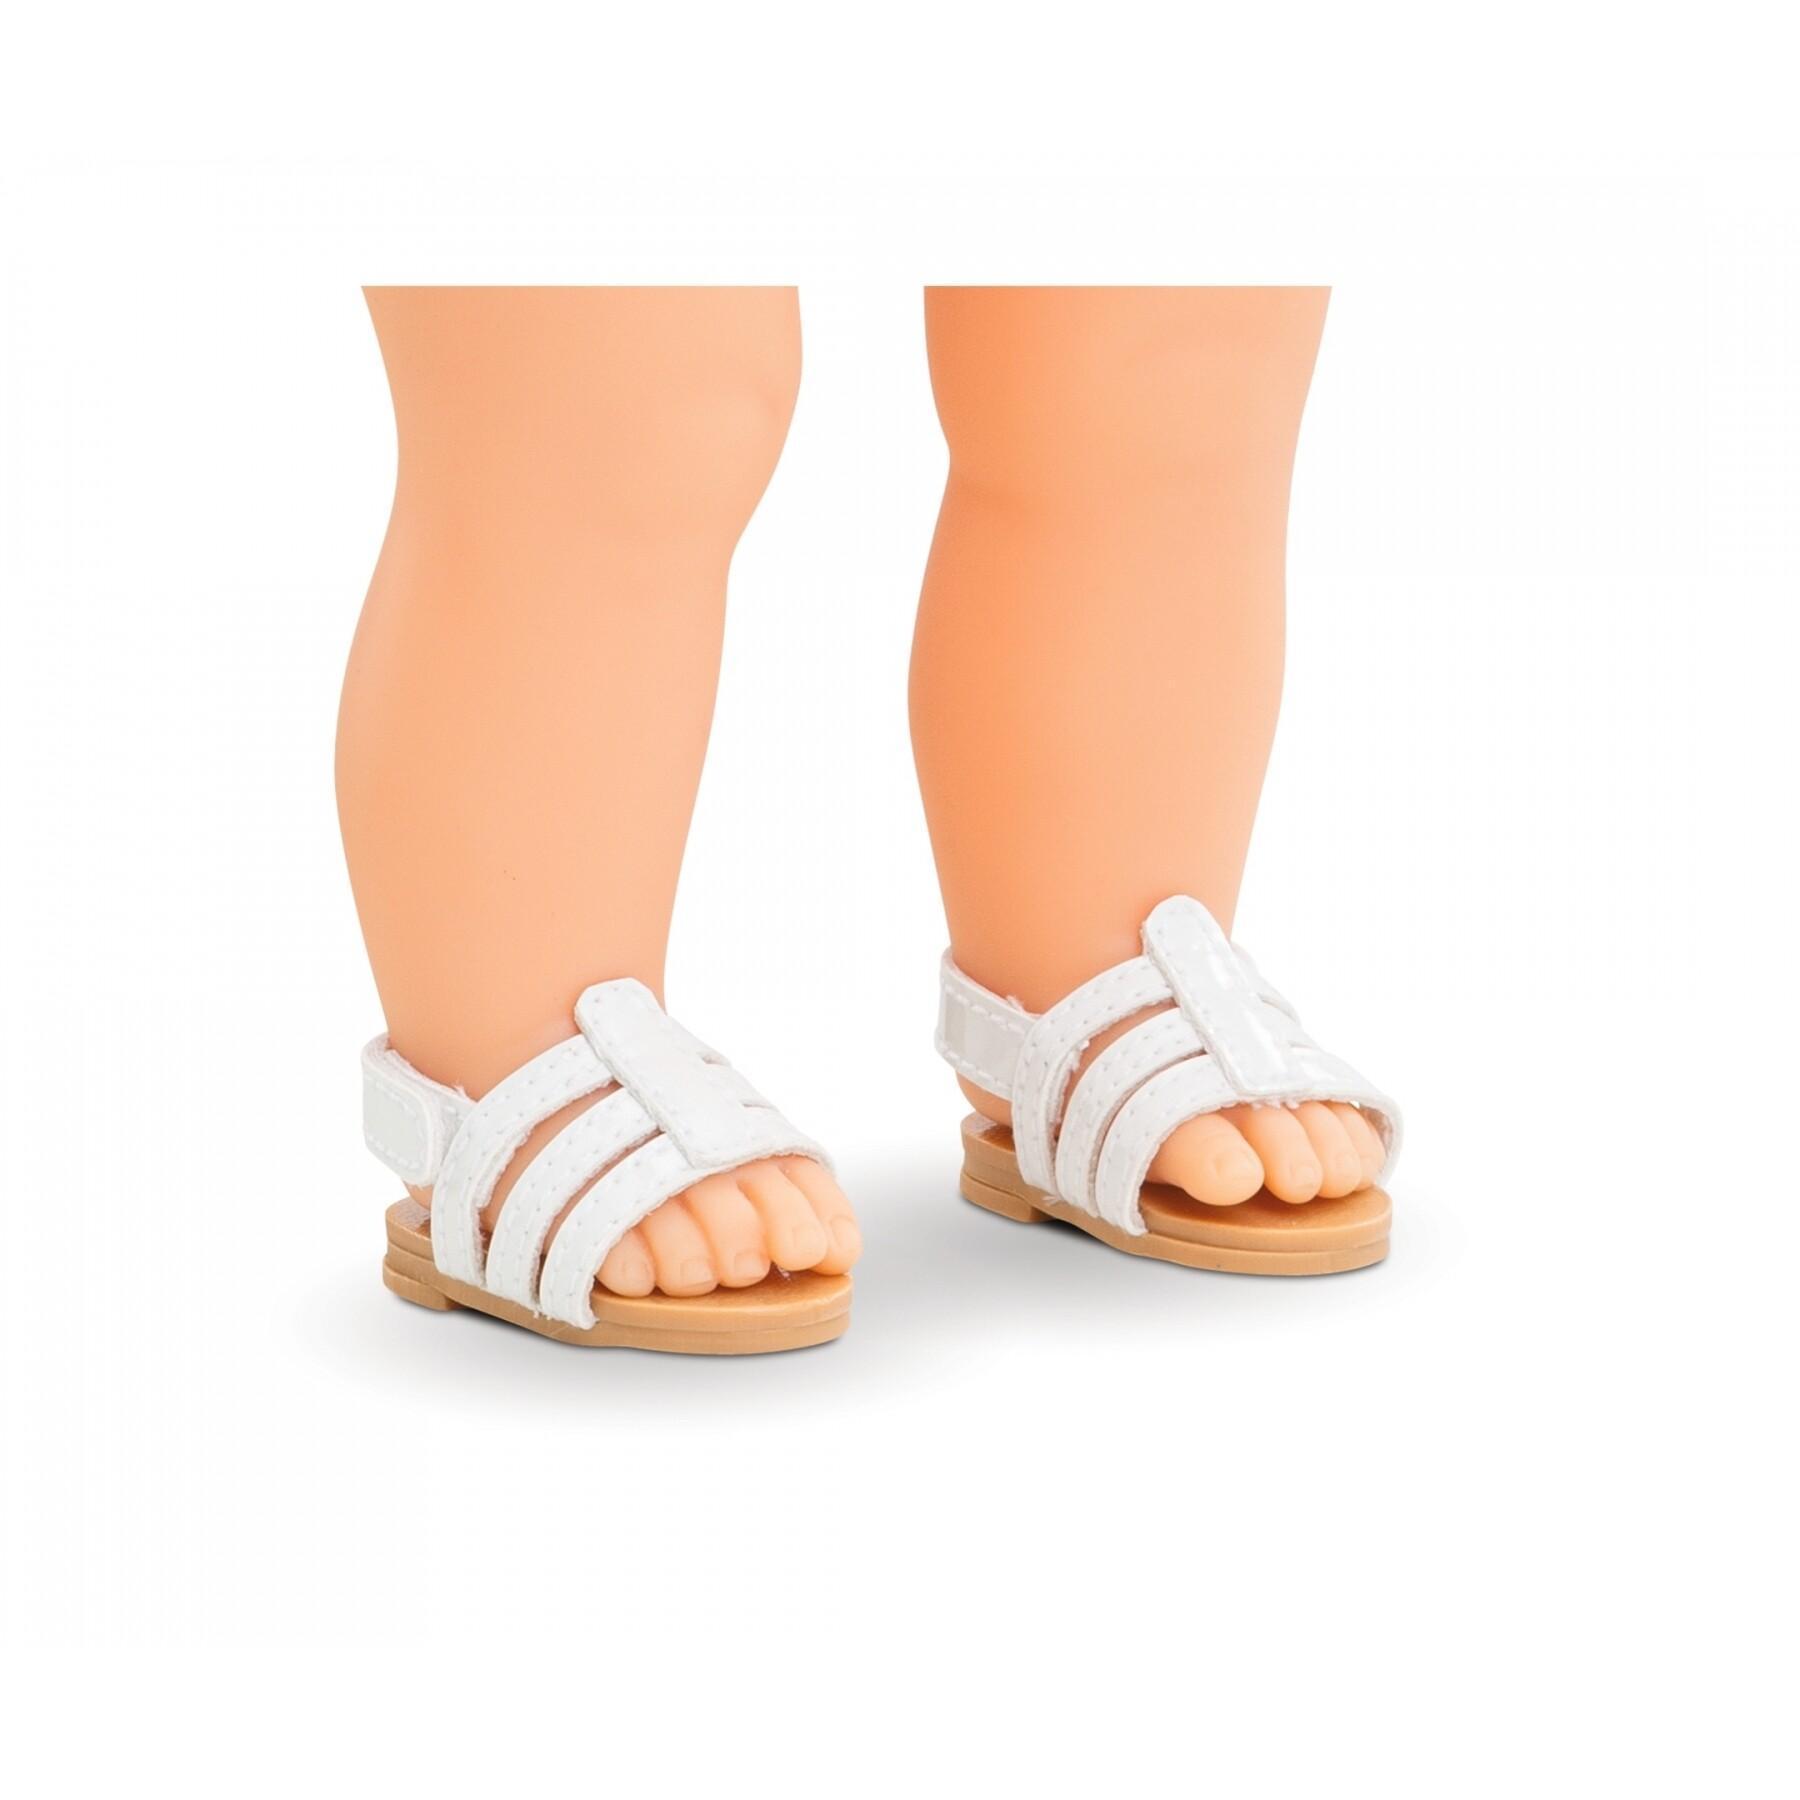 Sandals for dolls ma Corolle